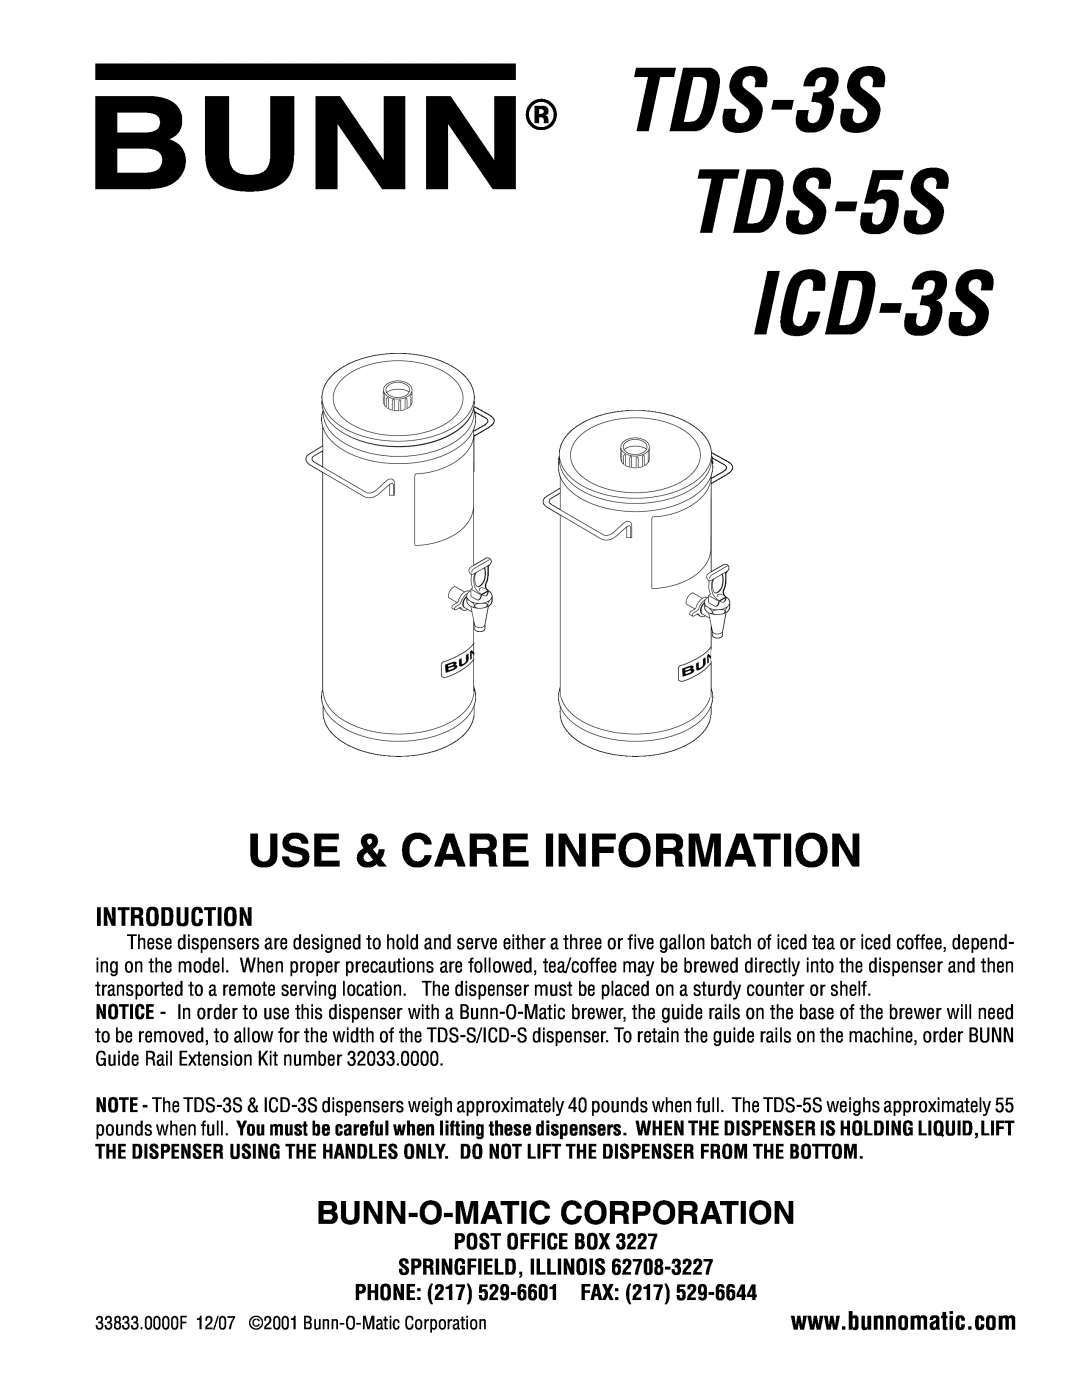 Bunn manual Introduction, Post Office Box Springfield, Illinois, PHONE 217 529-6601FAX, TDS-3S TDS-5S ICD-3S 